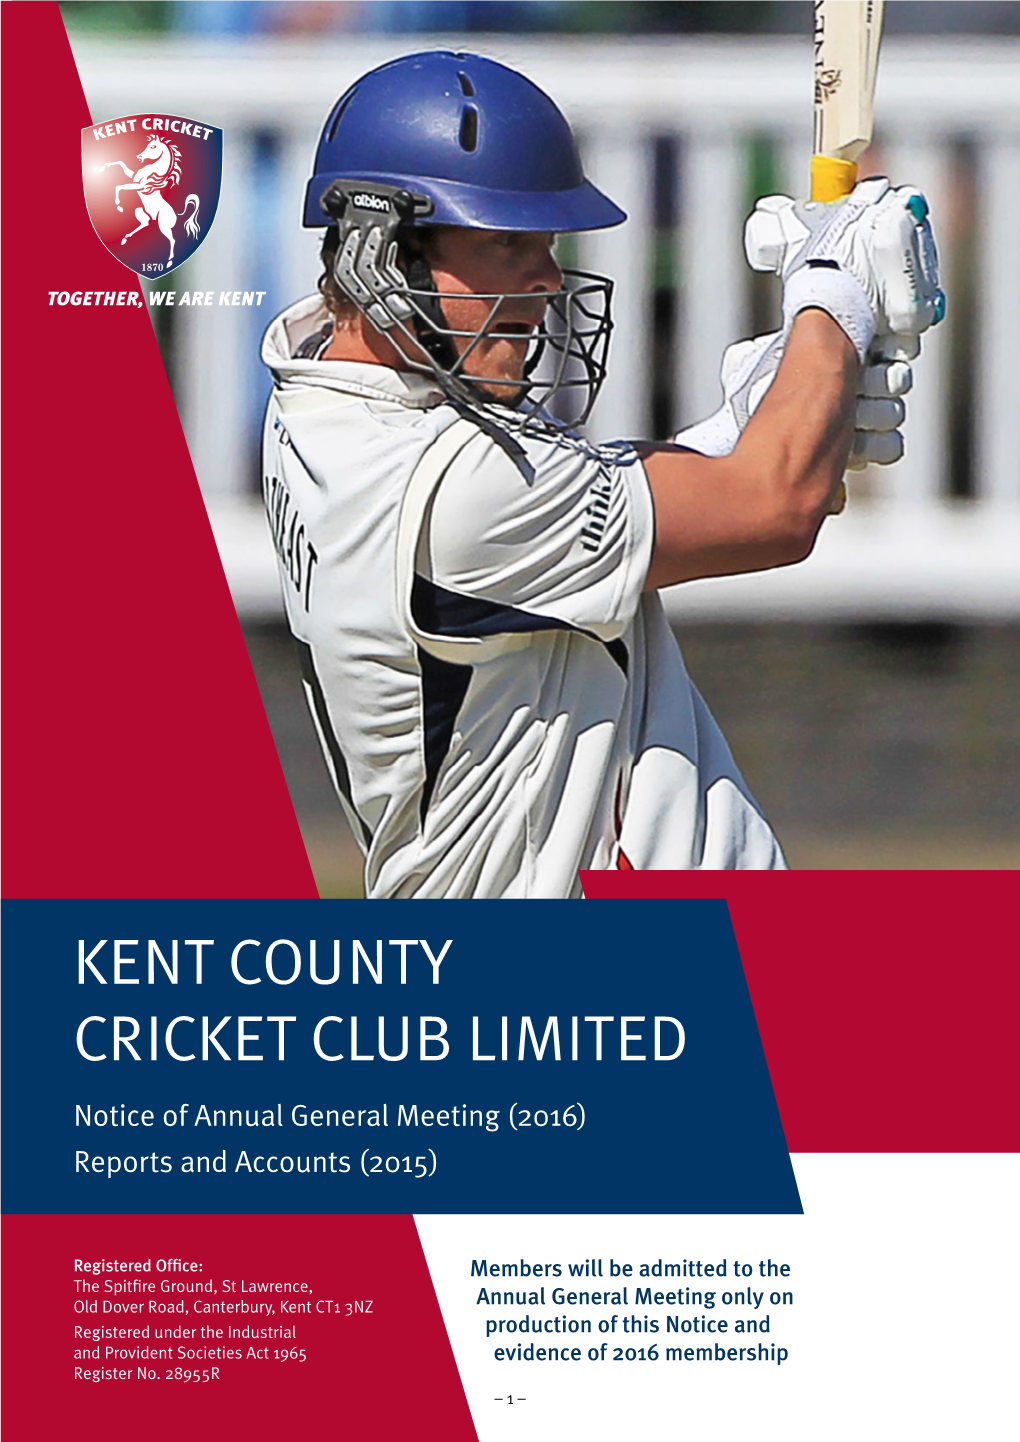 KENT COUNTY CRICKET CLUB LIMITED Notice of Annual General Meeting (2016) Reports and Accounts (2015)